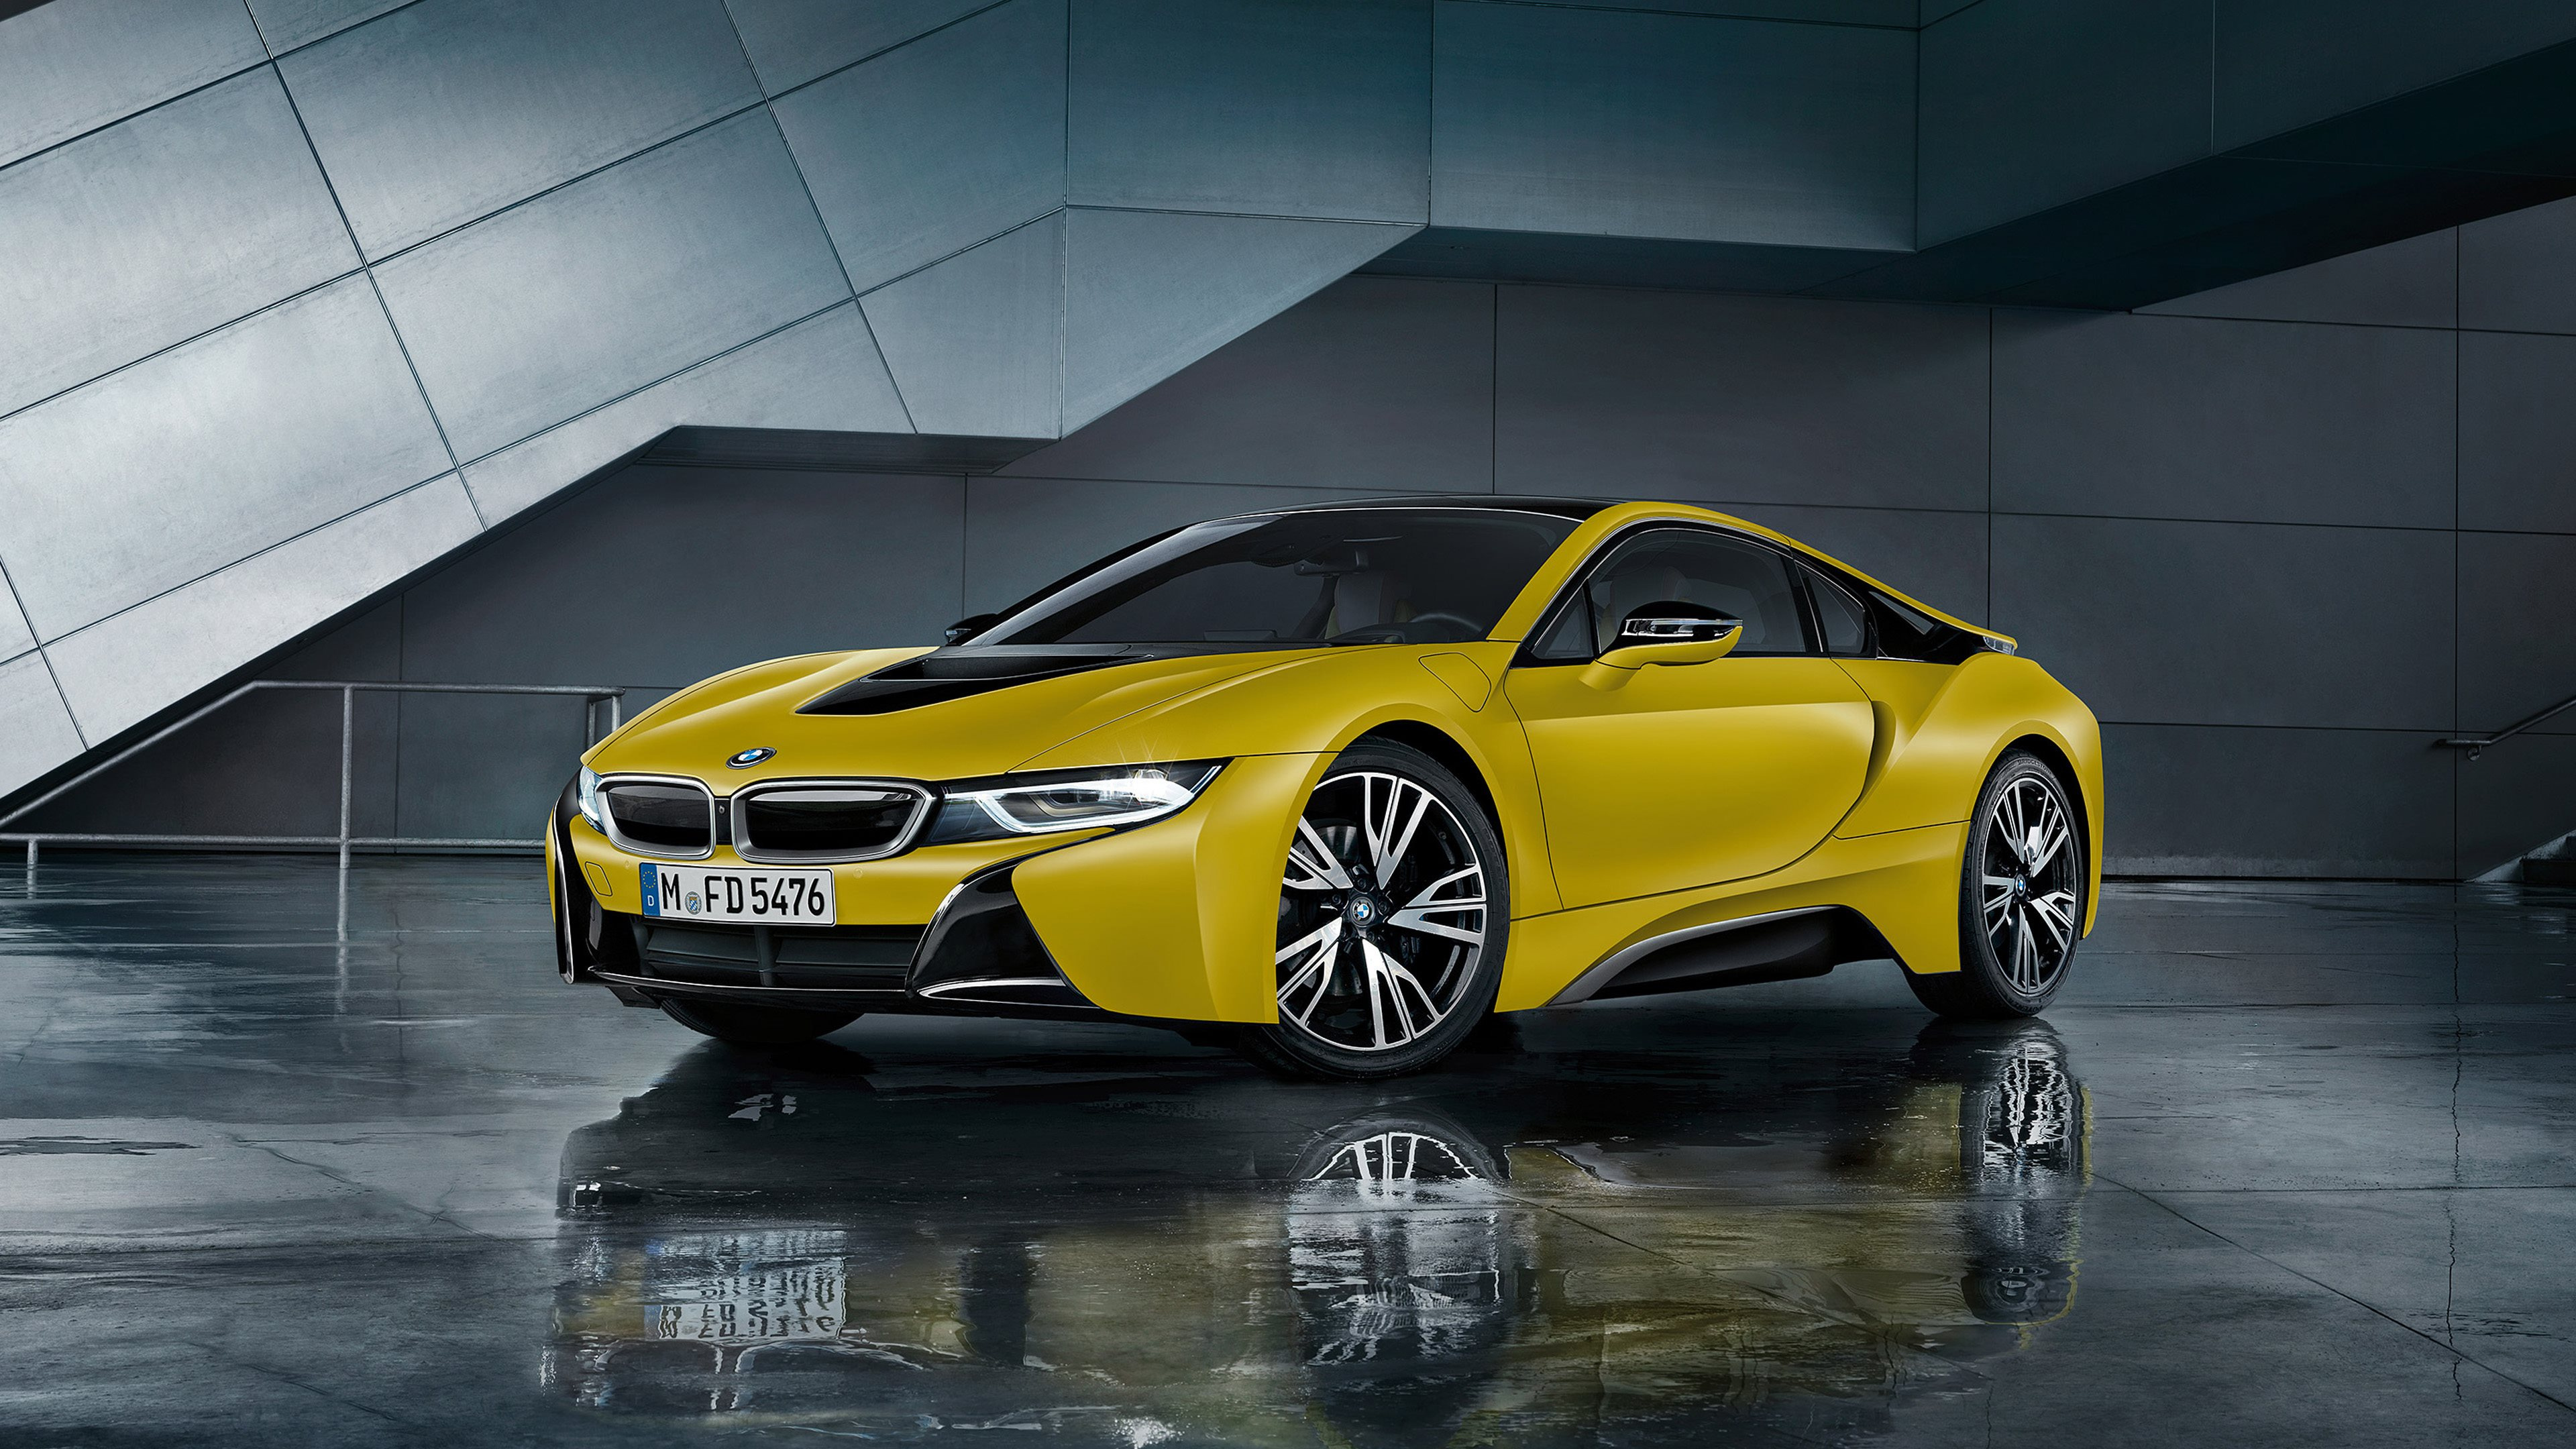 2018 BMW i8 Protonic Frozen Yellow, Free download, Stunning wallpapers, Android and desktop, Unmatched elegance, 3840x2160 4K Desktop